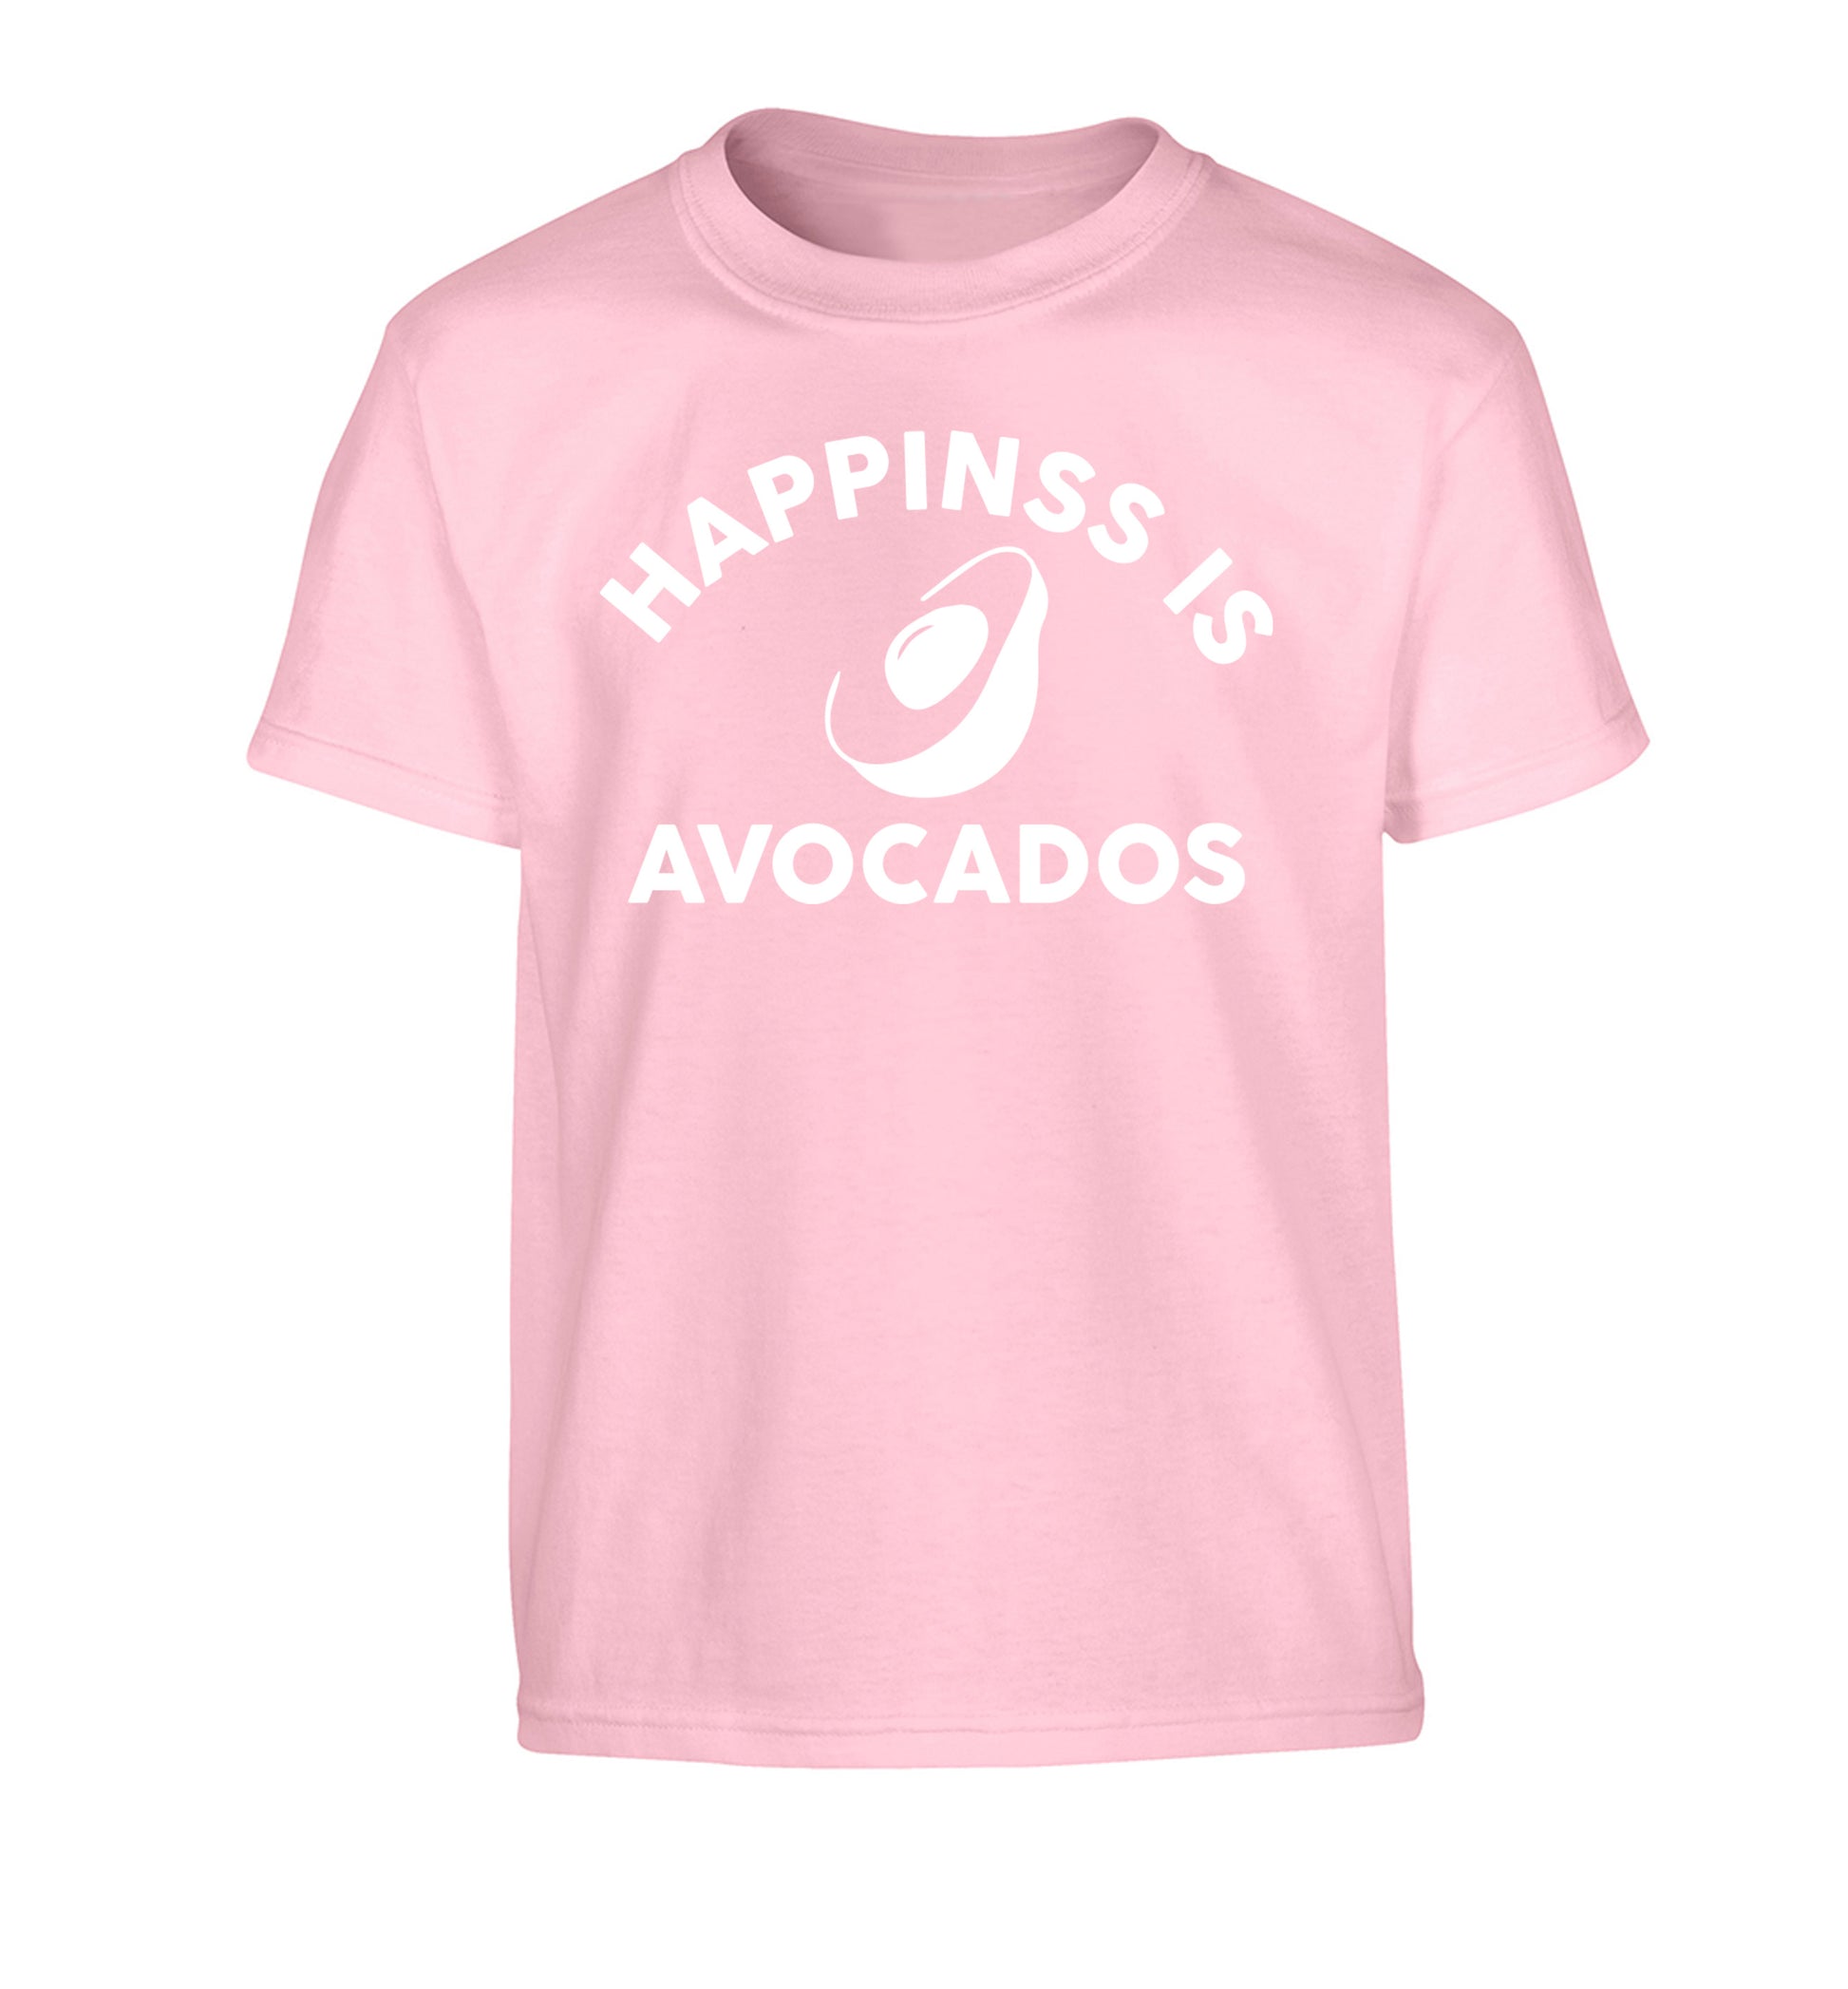 Happiness is avocados Children's light pink Tshirt 12-14 Years